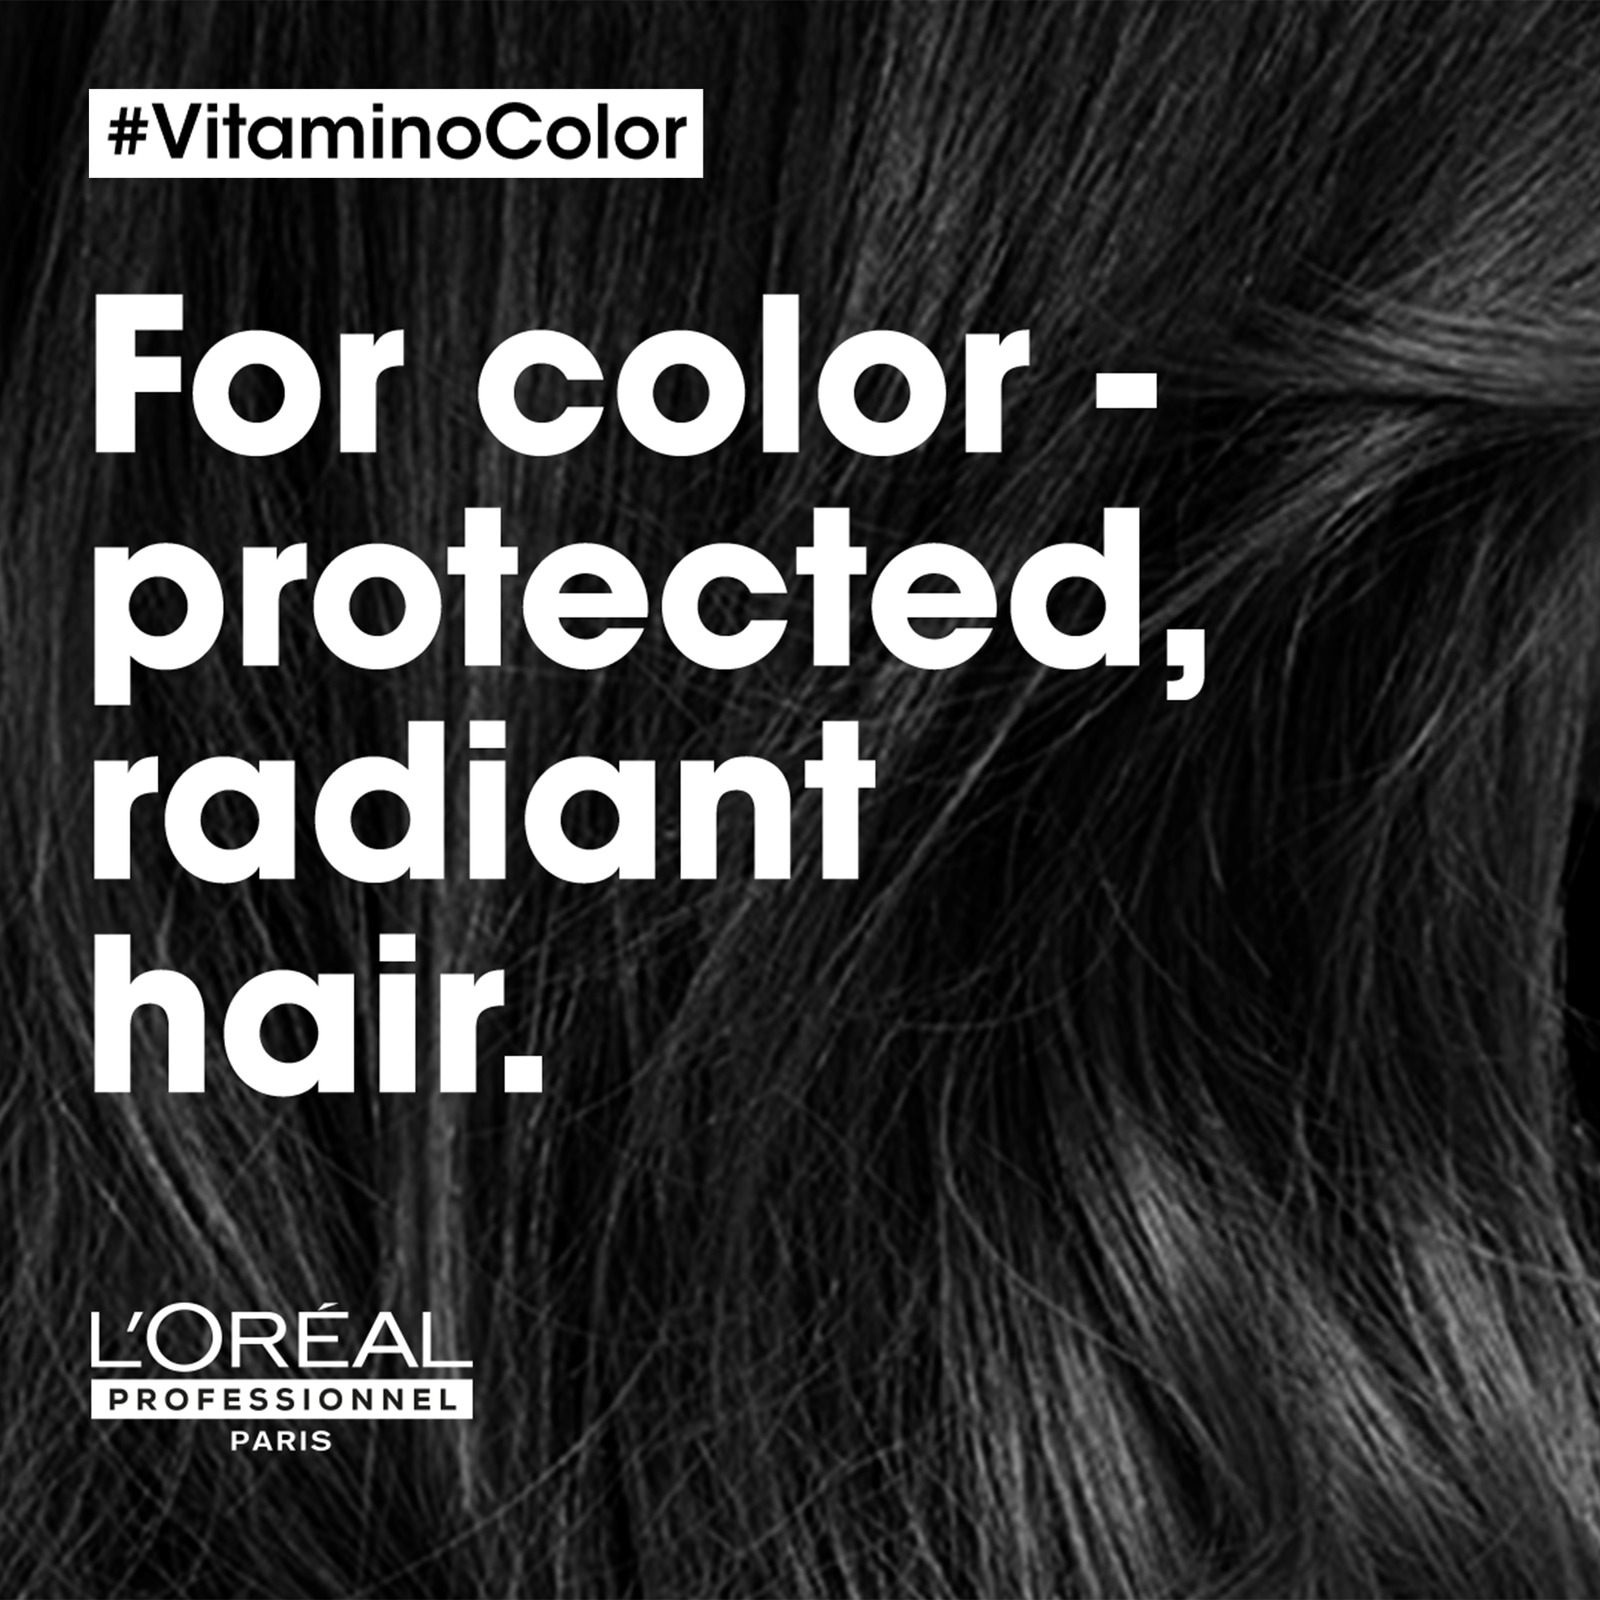 Loreal Professionnel Serie Expert Vitamino Color Mask With Resveratrol- 250ml - For Color Treated Hair